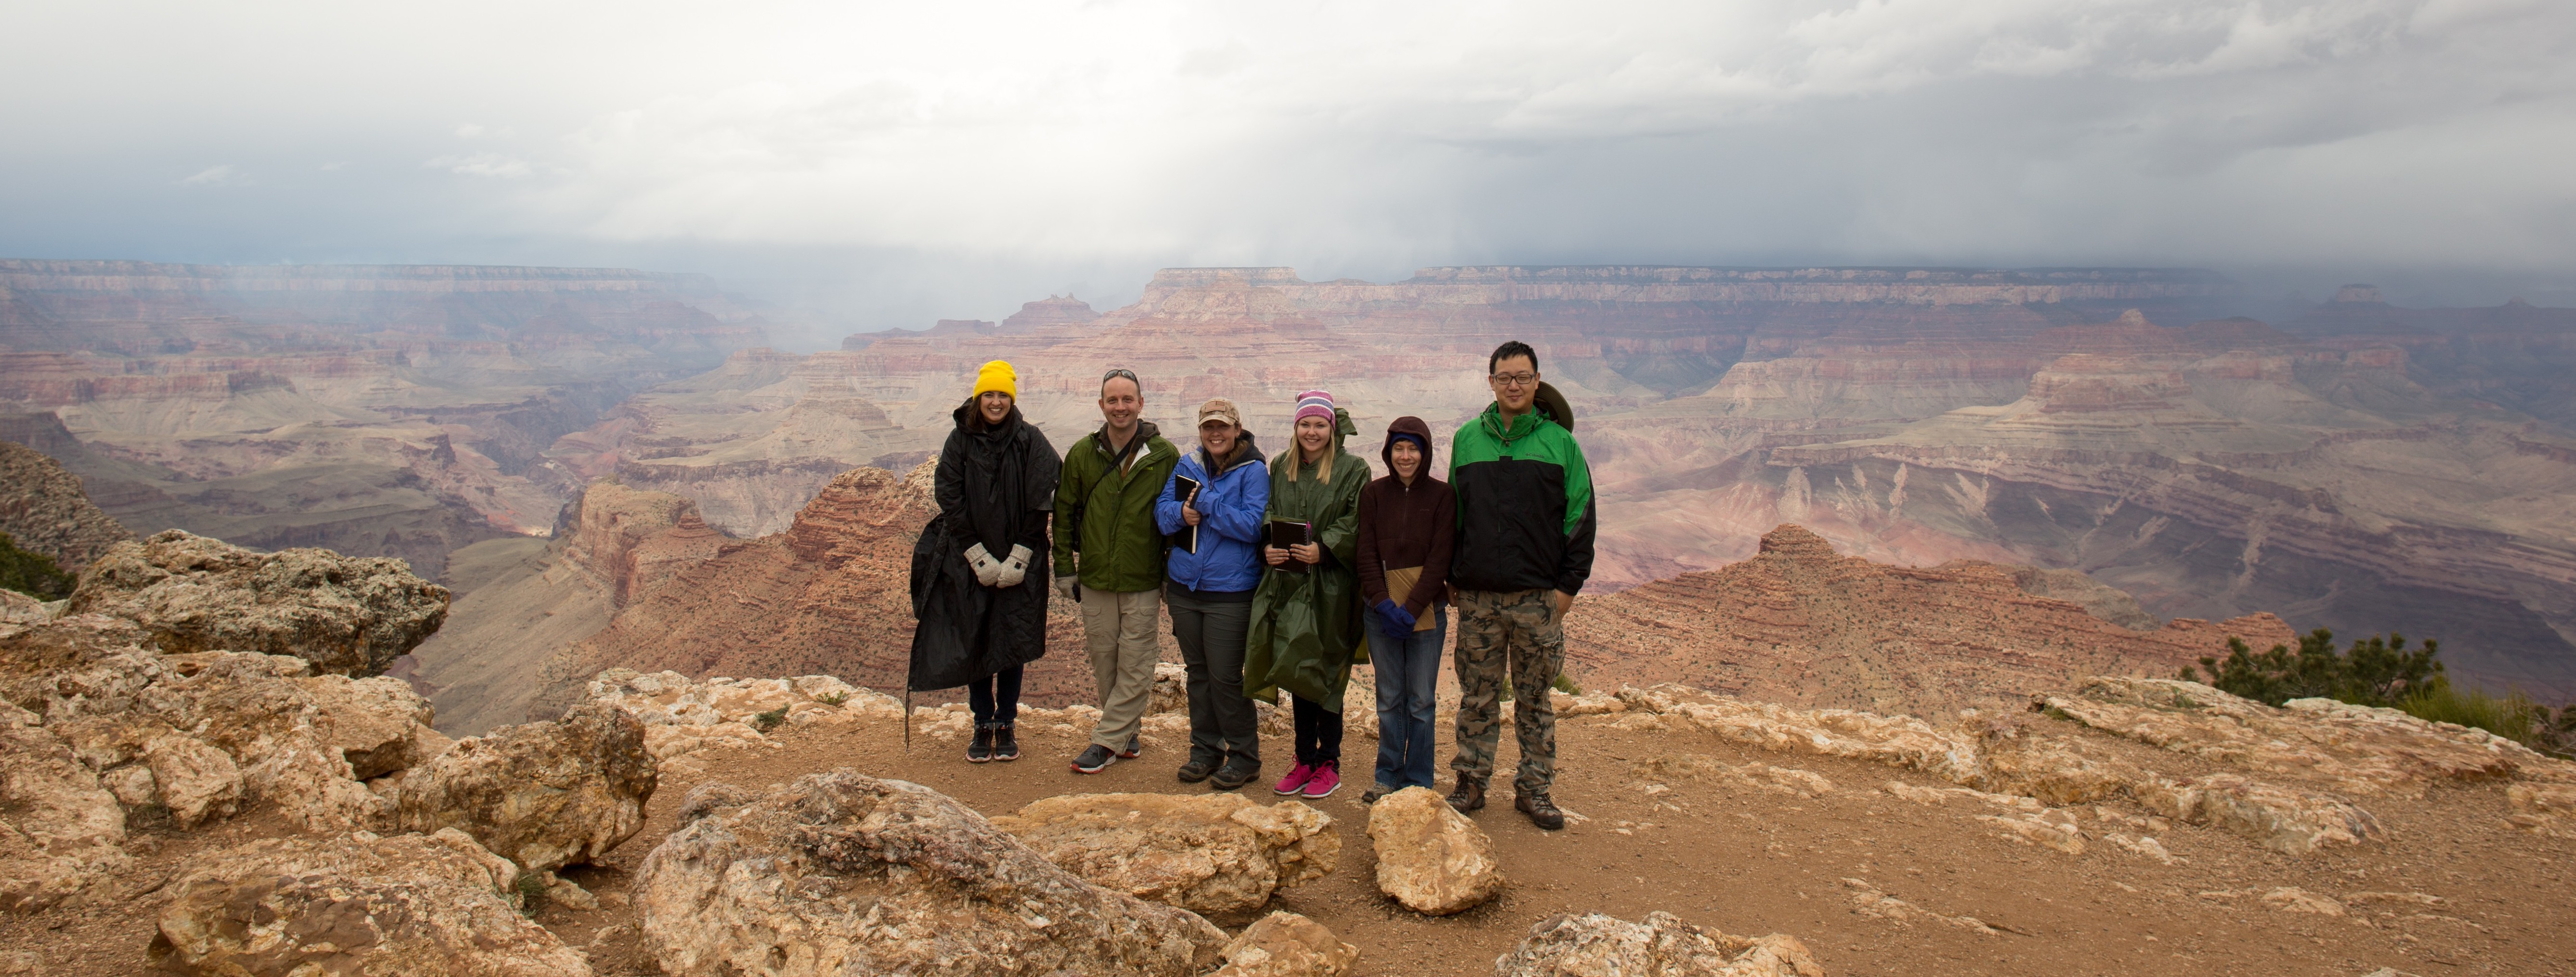 American Landscape Field Course at the Grand Canyon May 2015